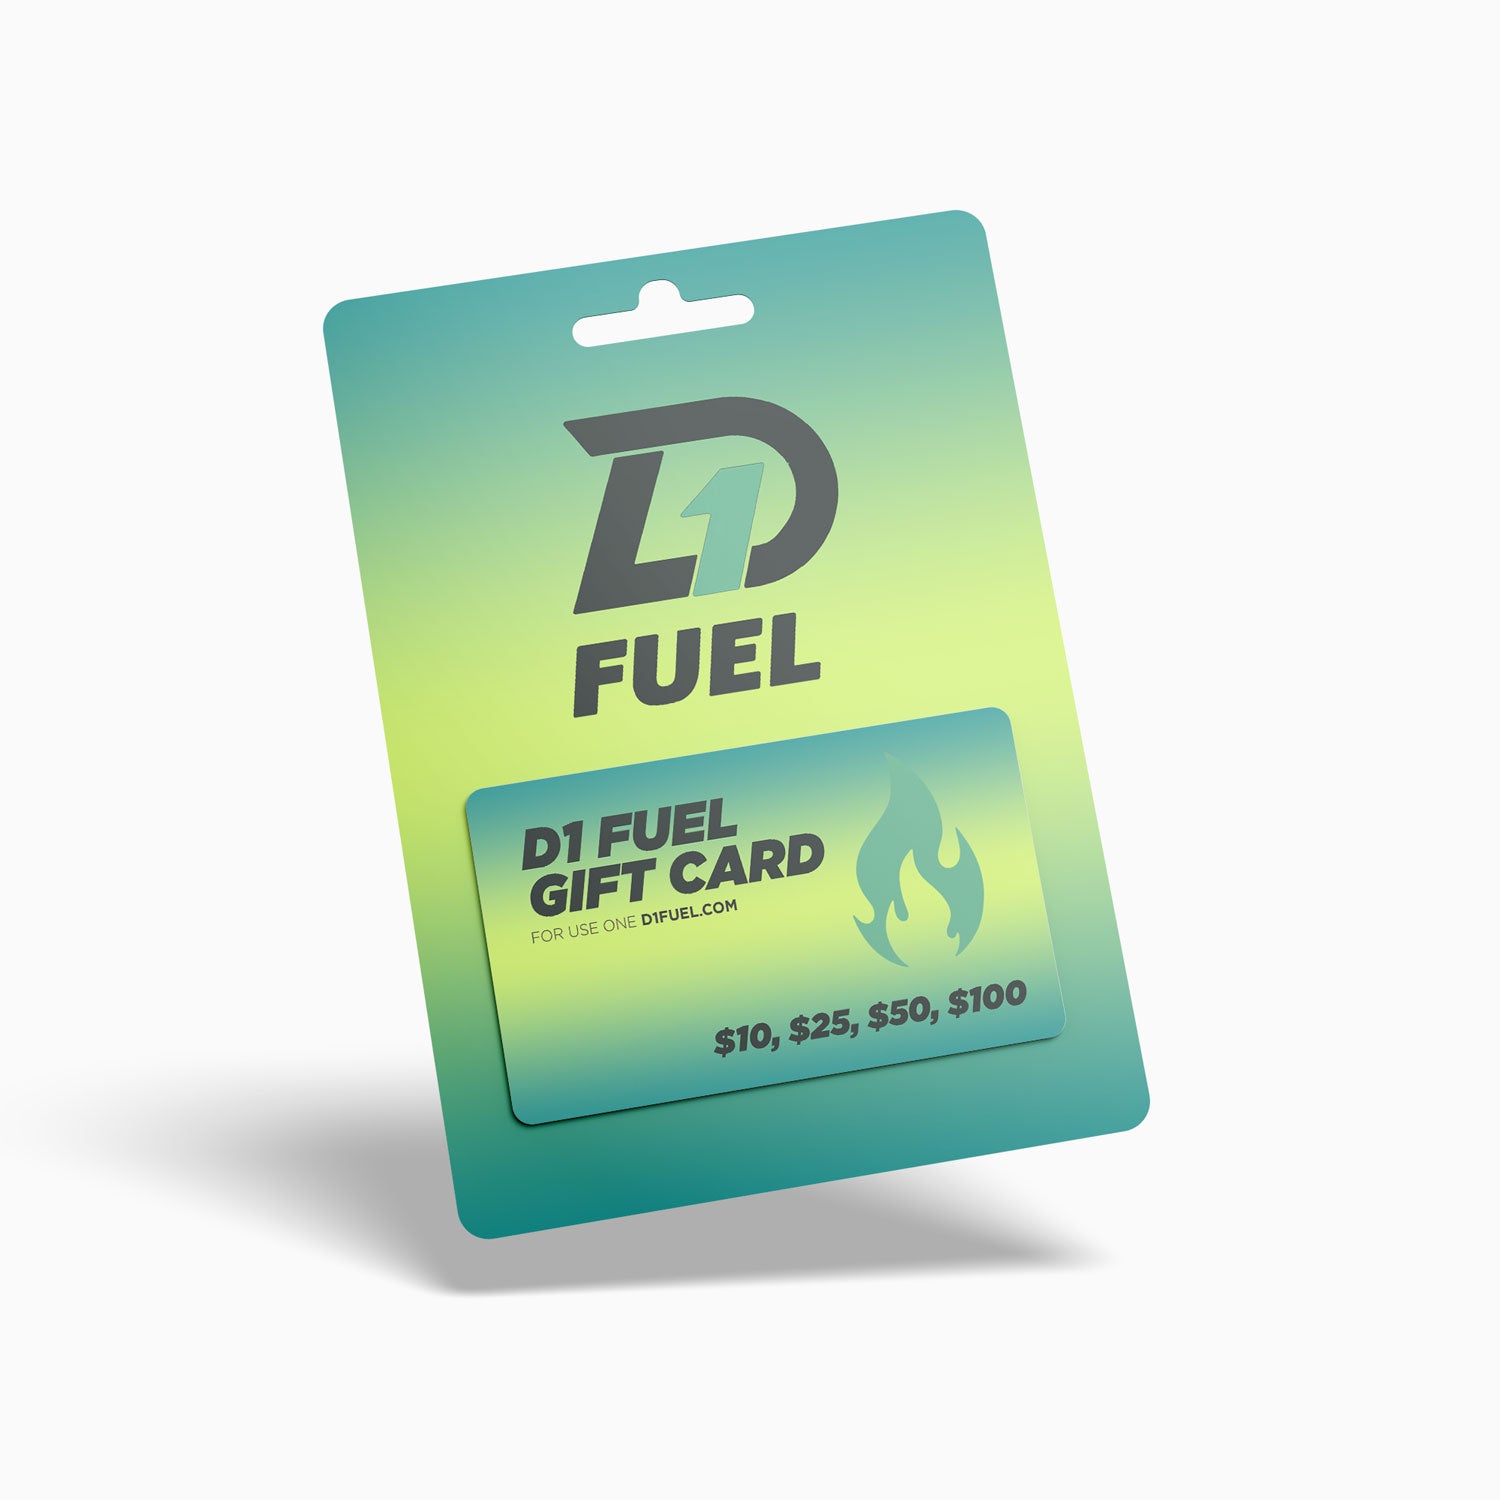 D1 Fuel Gift Card